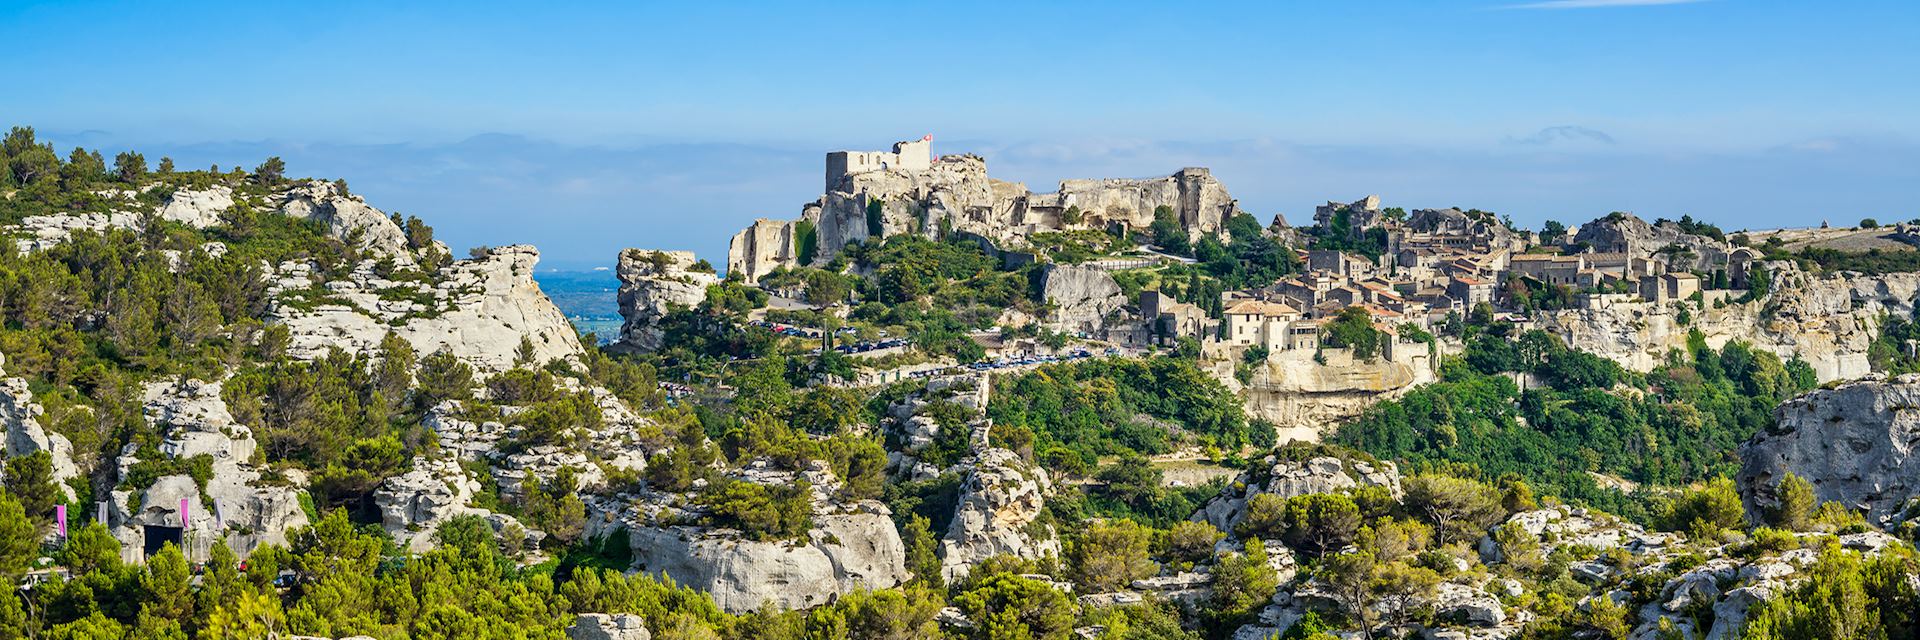 Tailor-Made Vacations to Les-Baux-de-Provence | Audley Travel